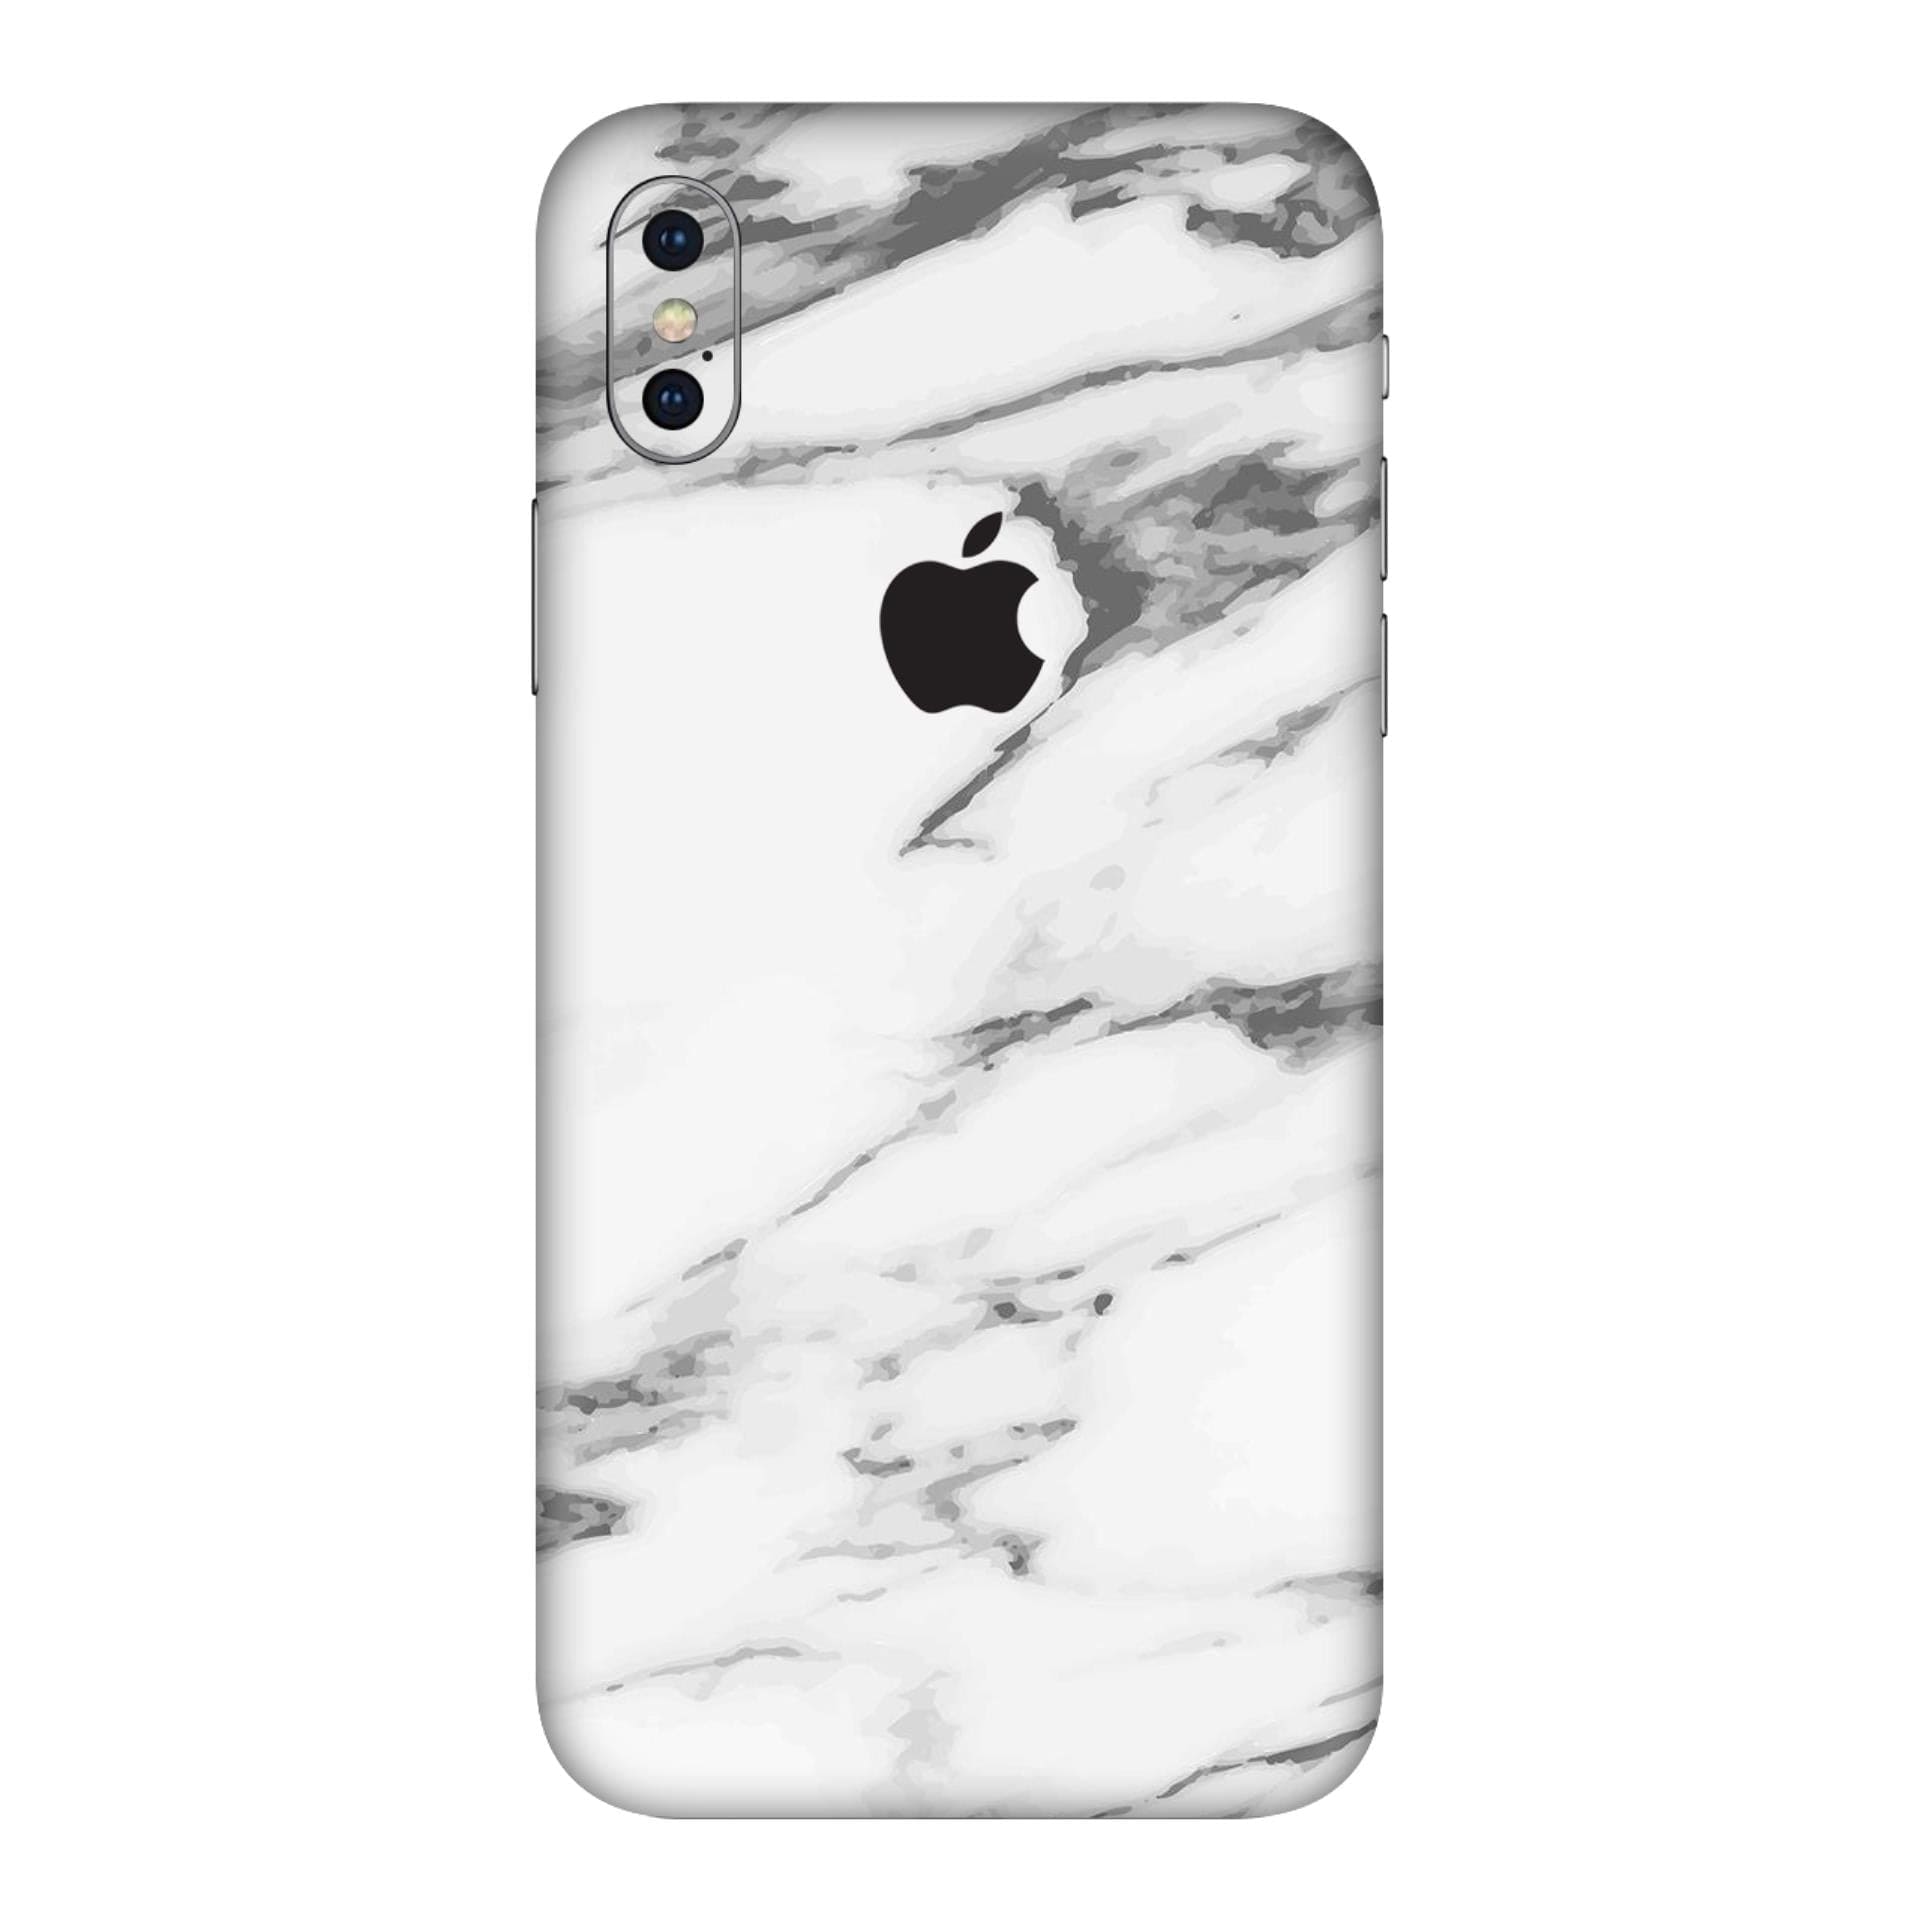 iphone X White Marble skins